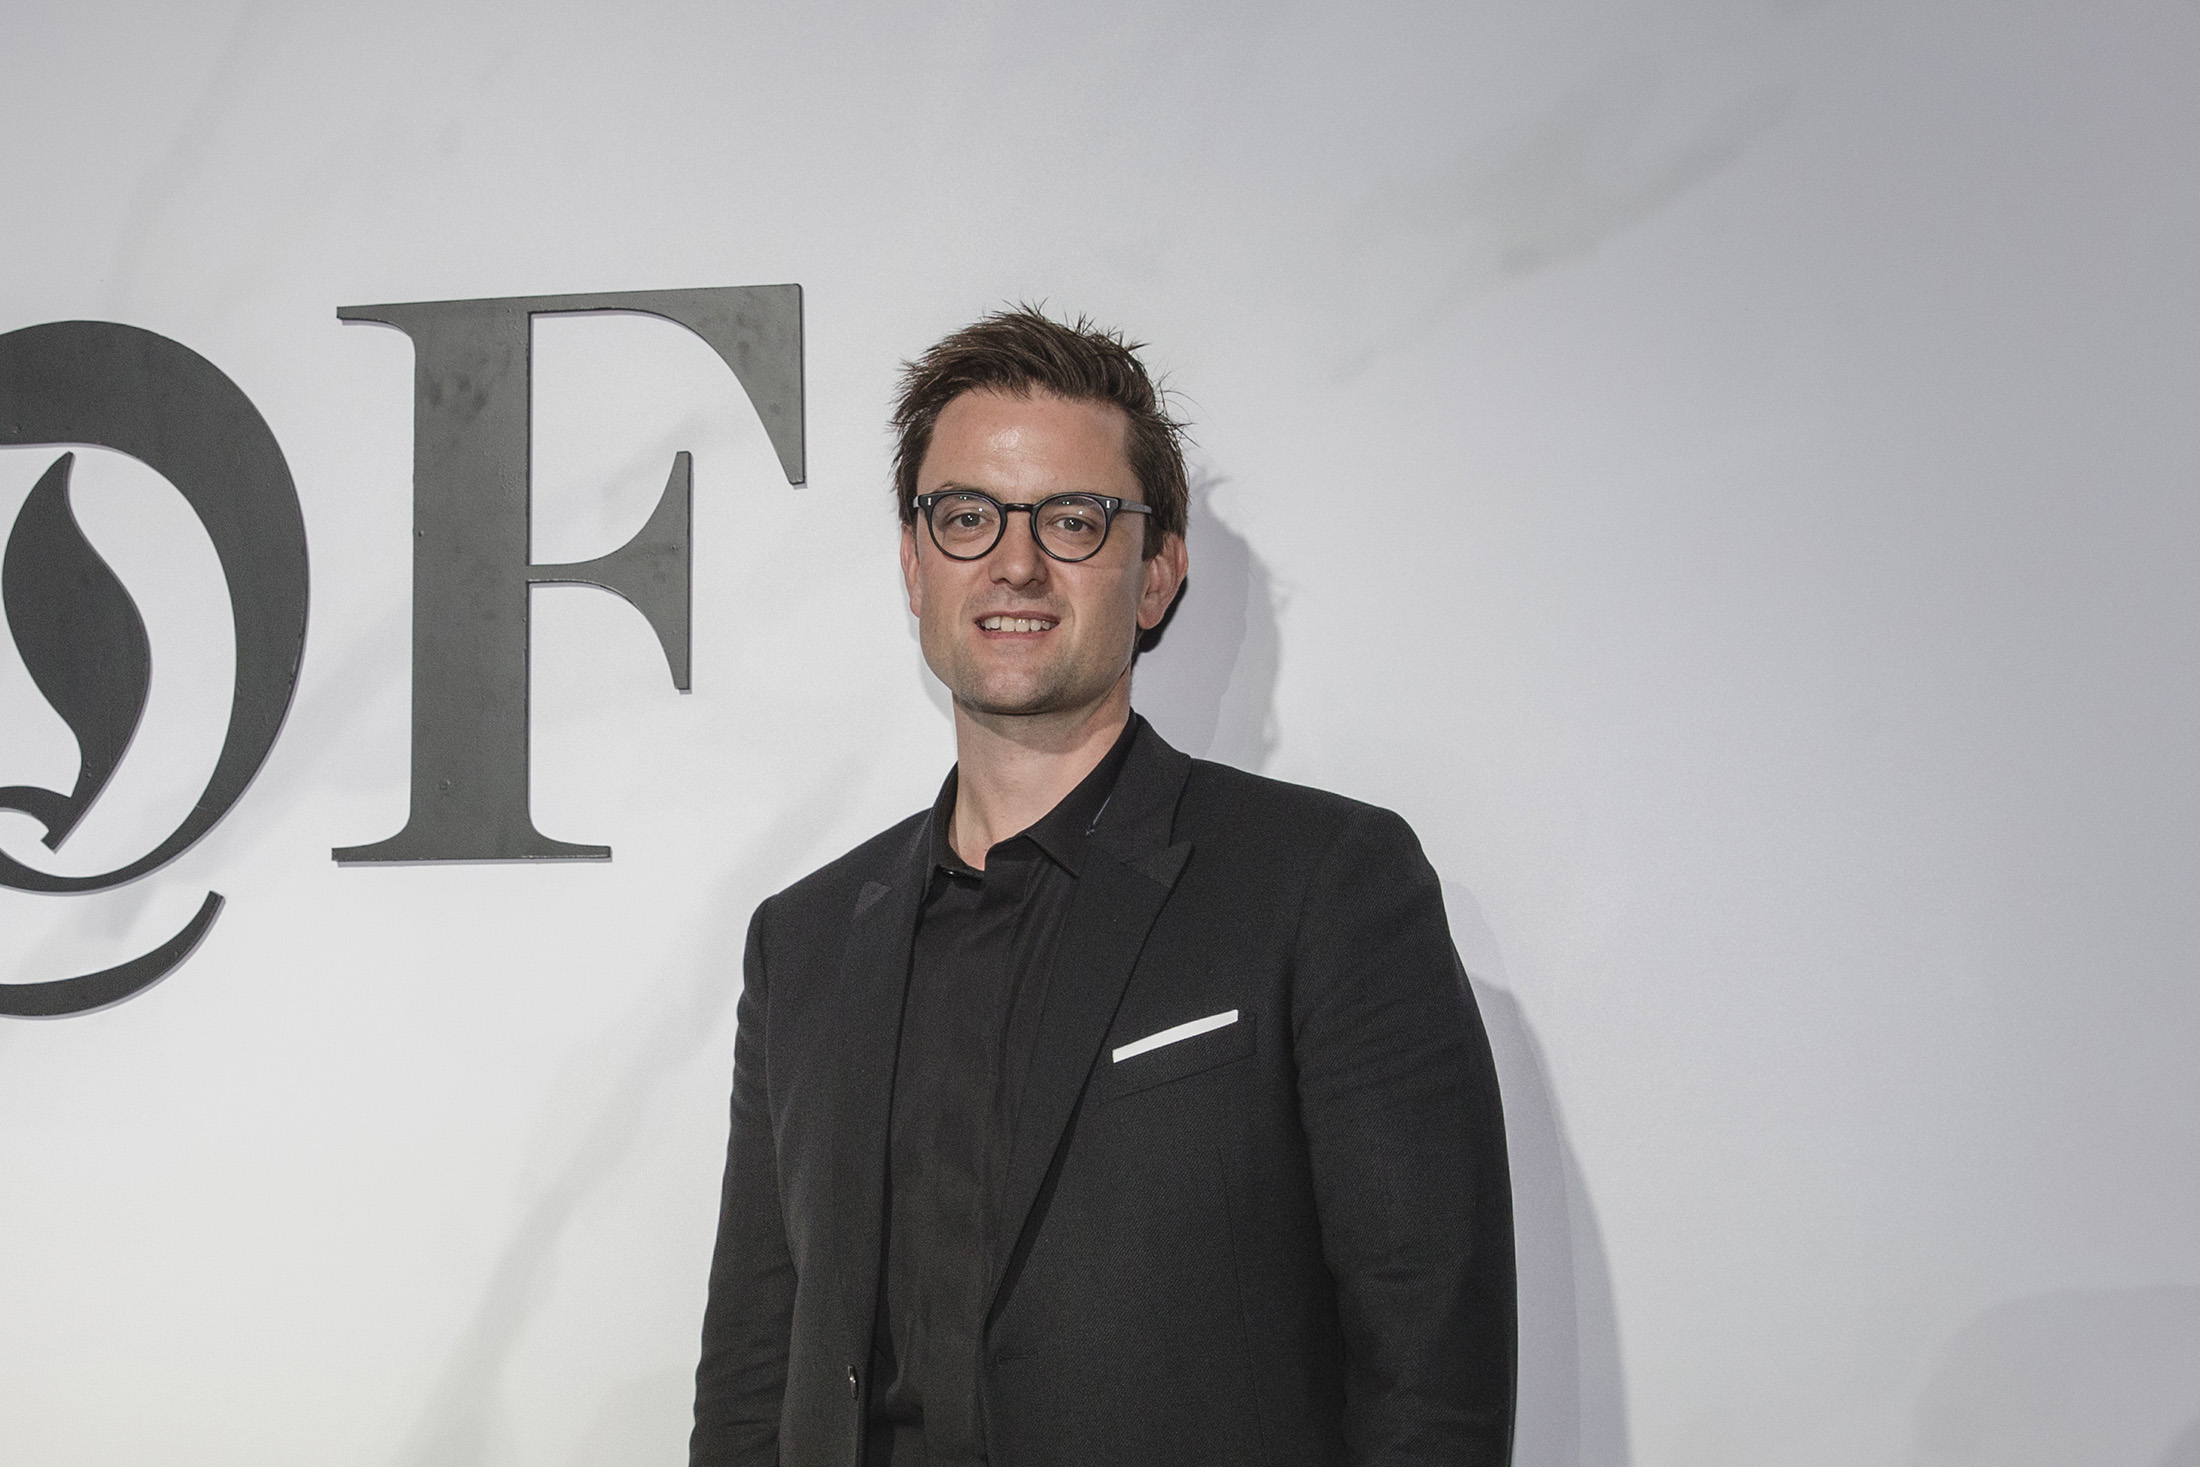 Farfetch announces new CEO for Off-White, leadership updates at